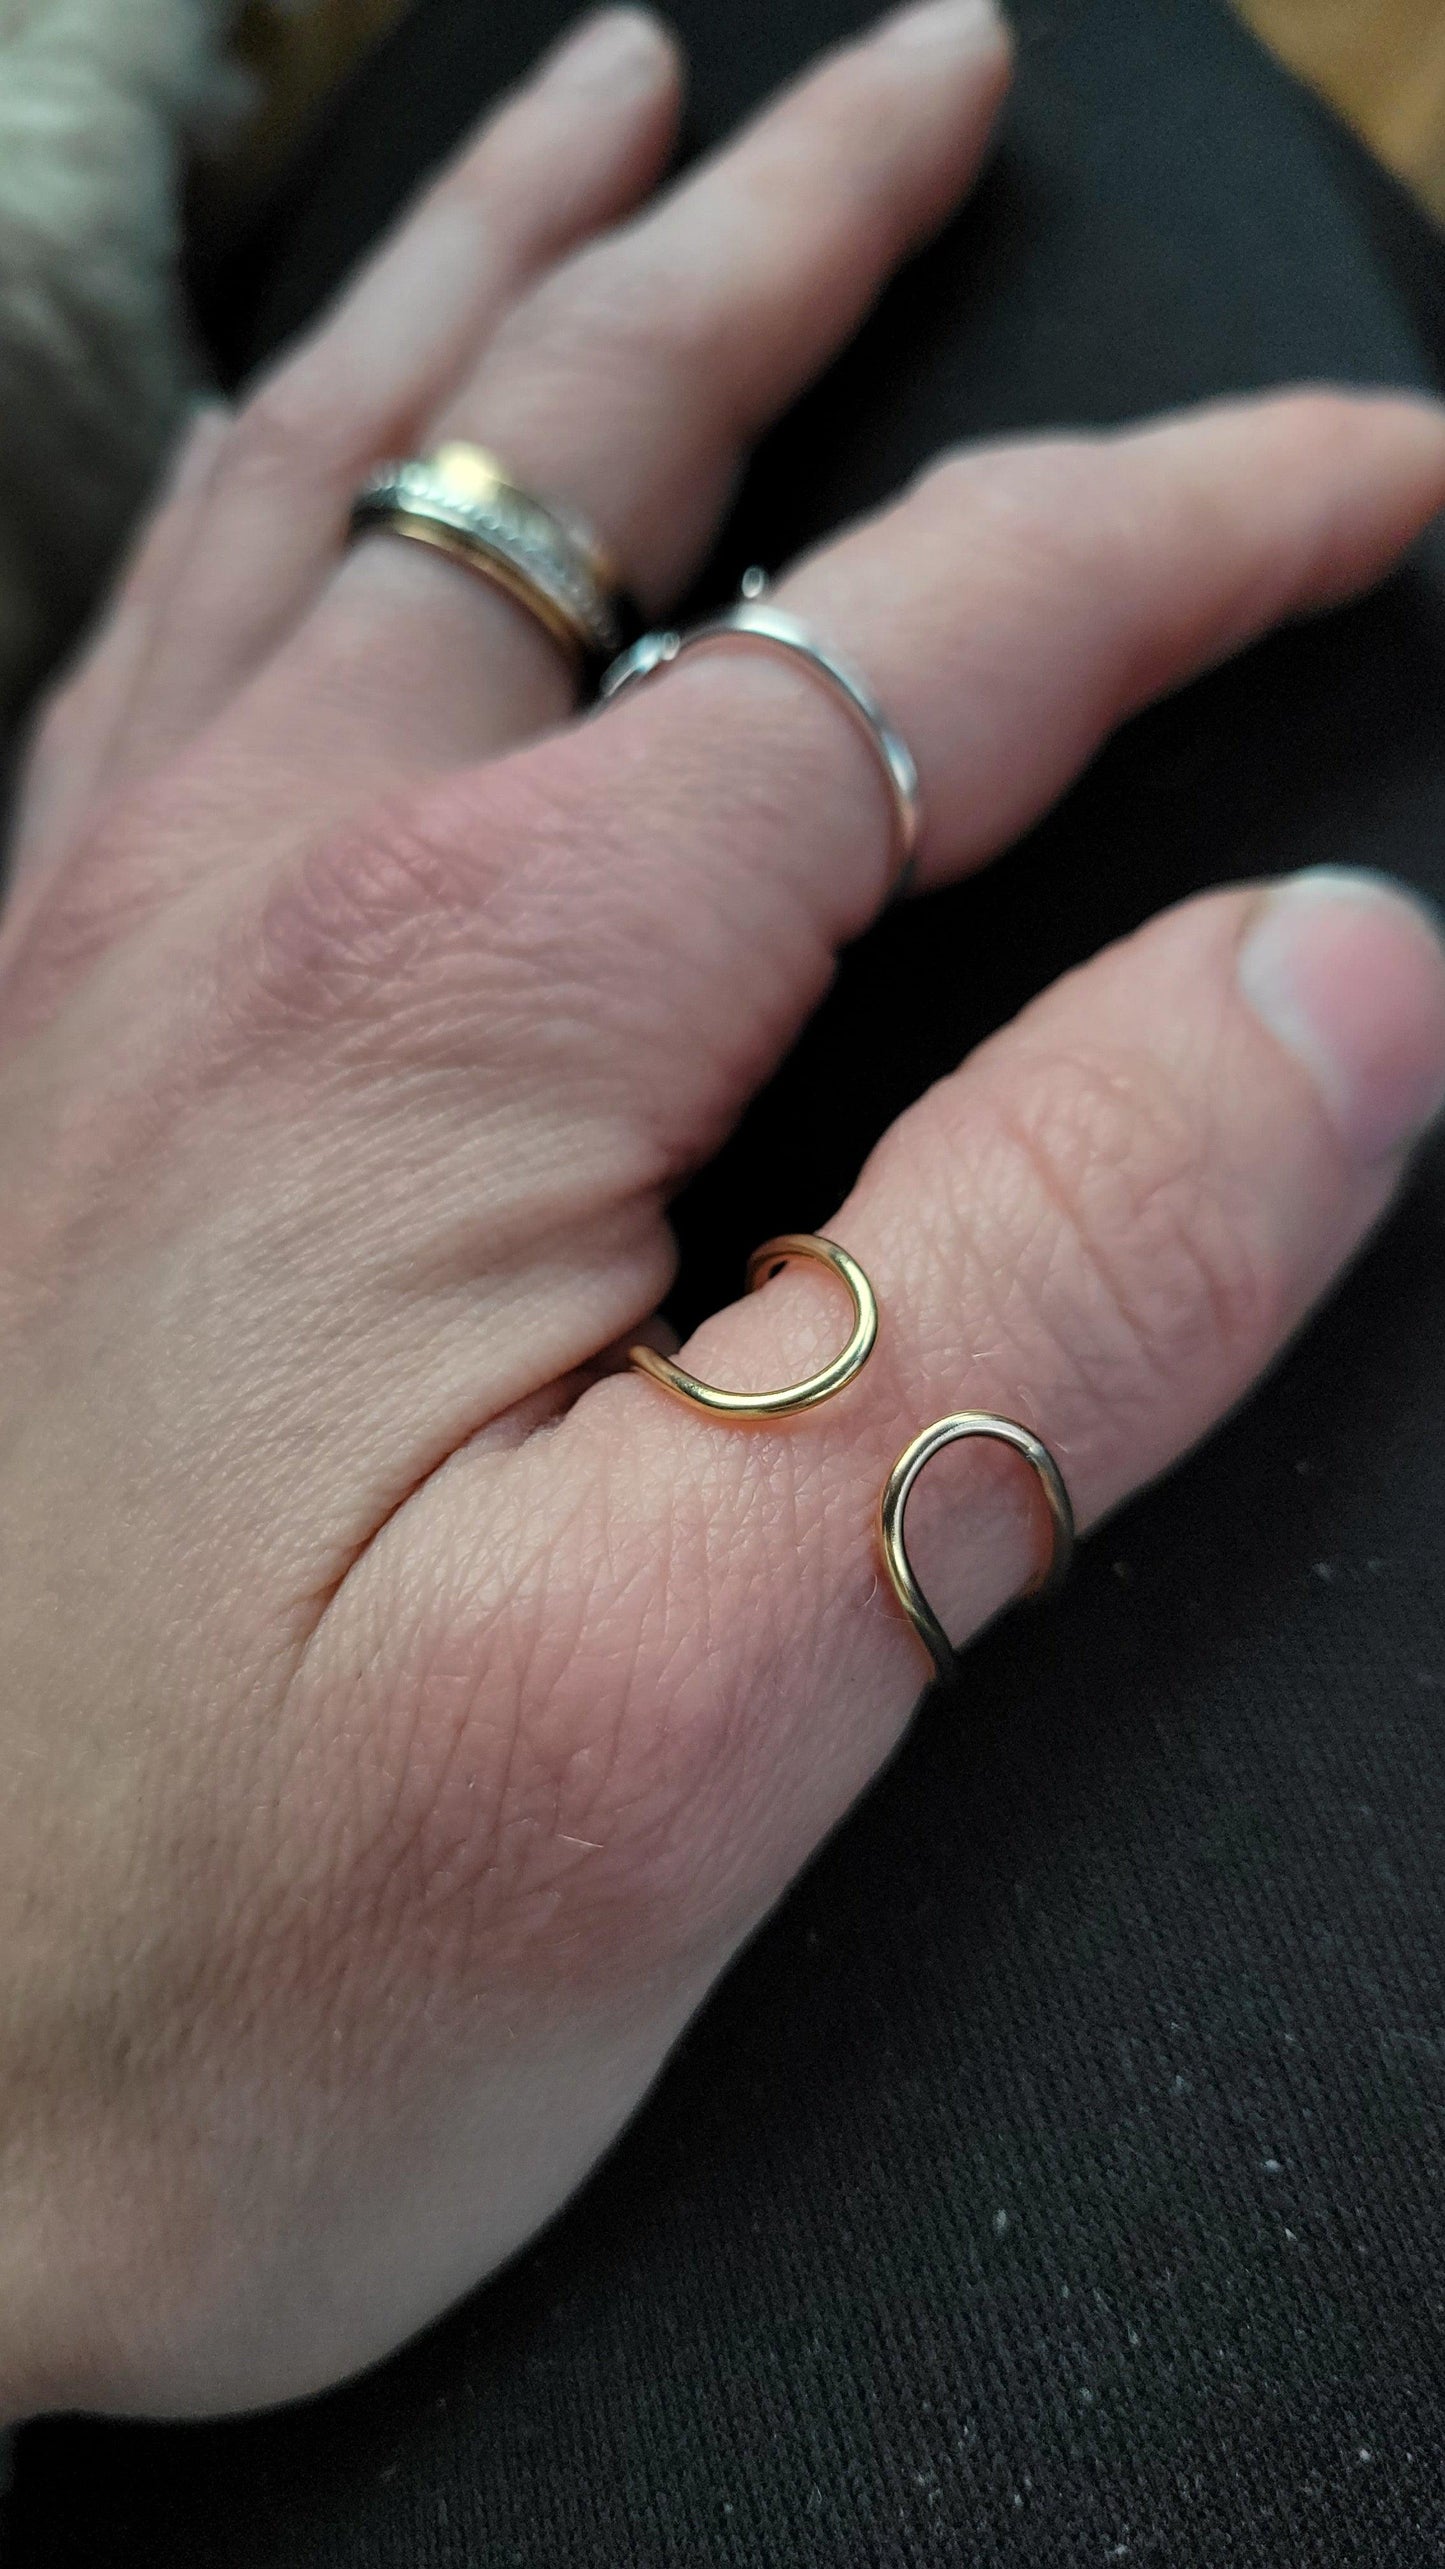 Space Between adjustable ring with meaning in 14K Gold modeled on a woman's hand